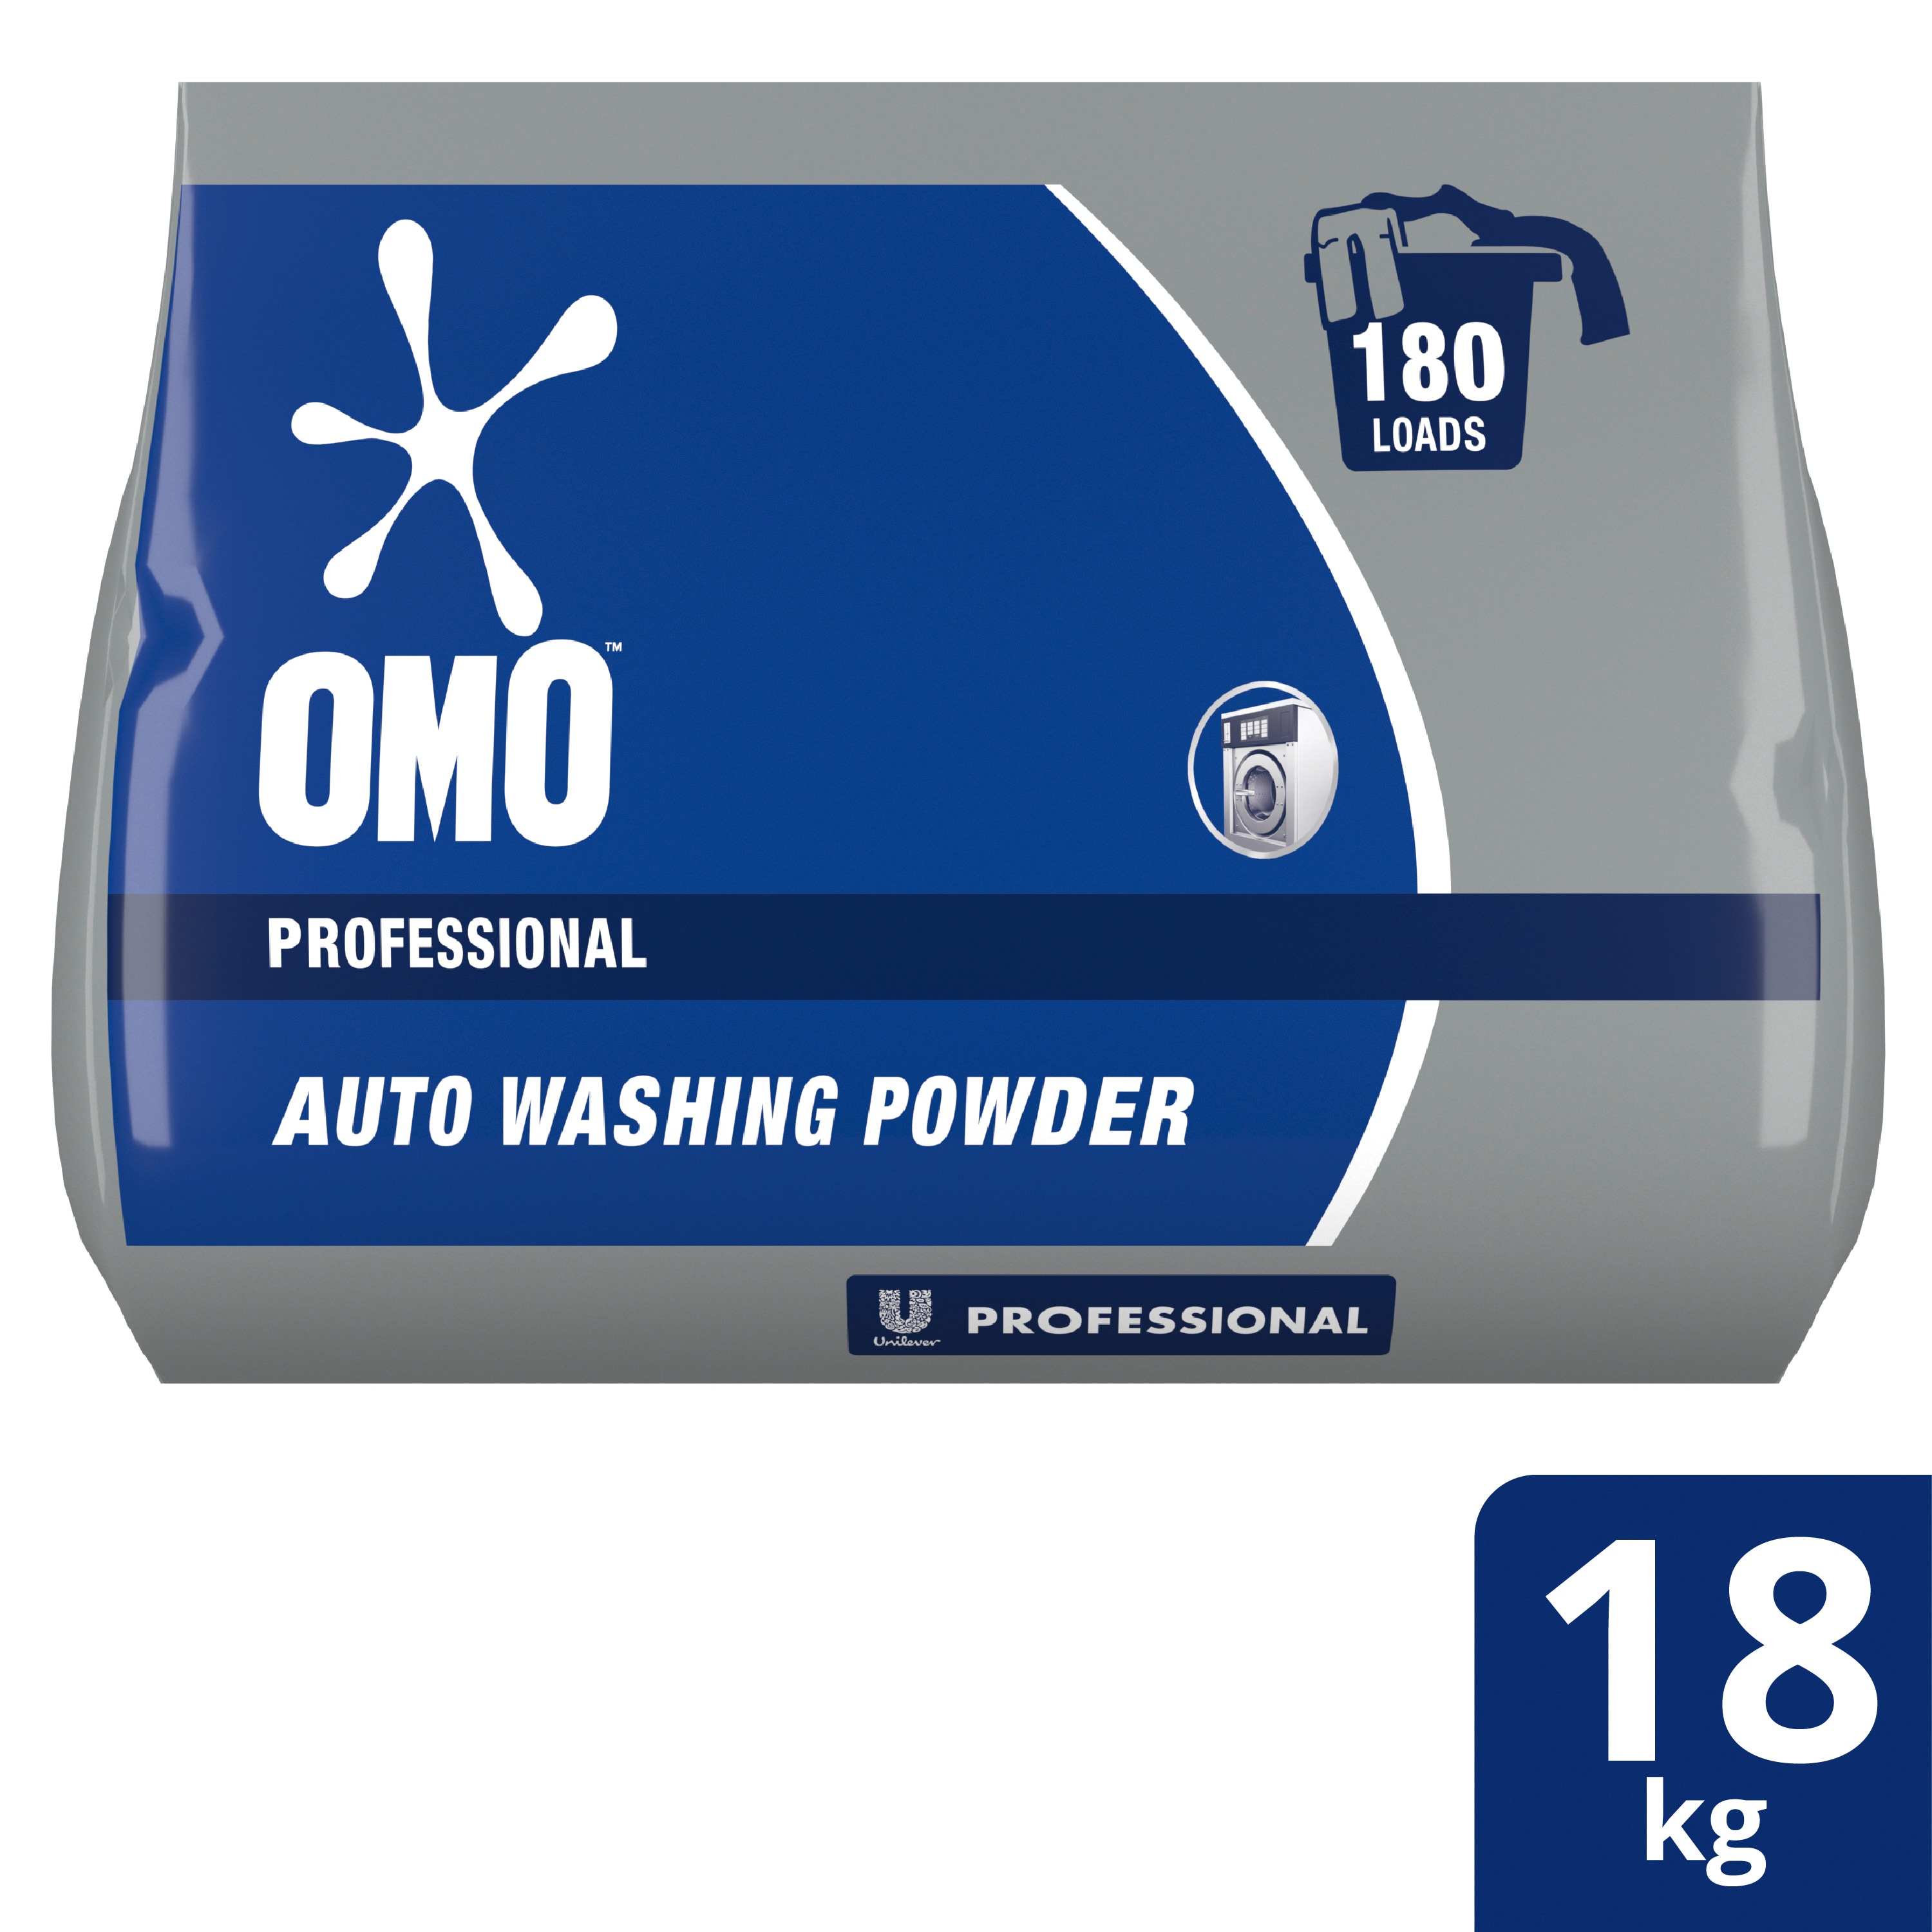 Unilever Professional OMO Auto Washing Powder 18 kg - OMO Auto 18 kg  is a strong fast acting washing powder that is known for its tough stain removal.